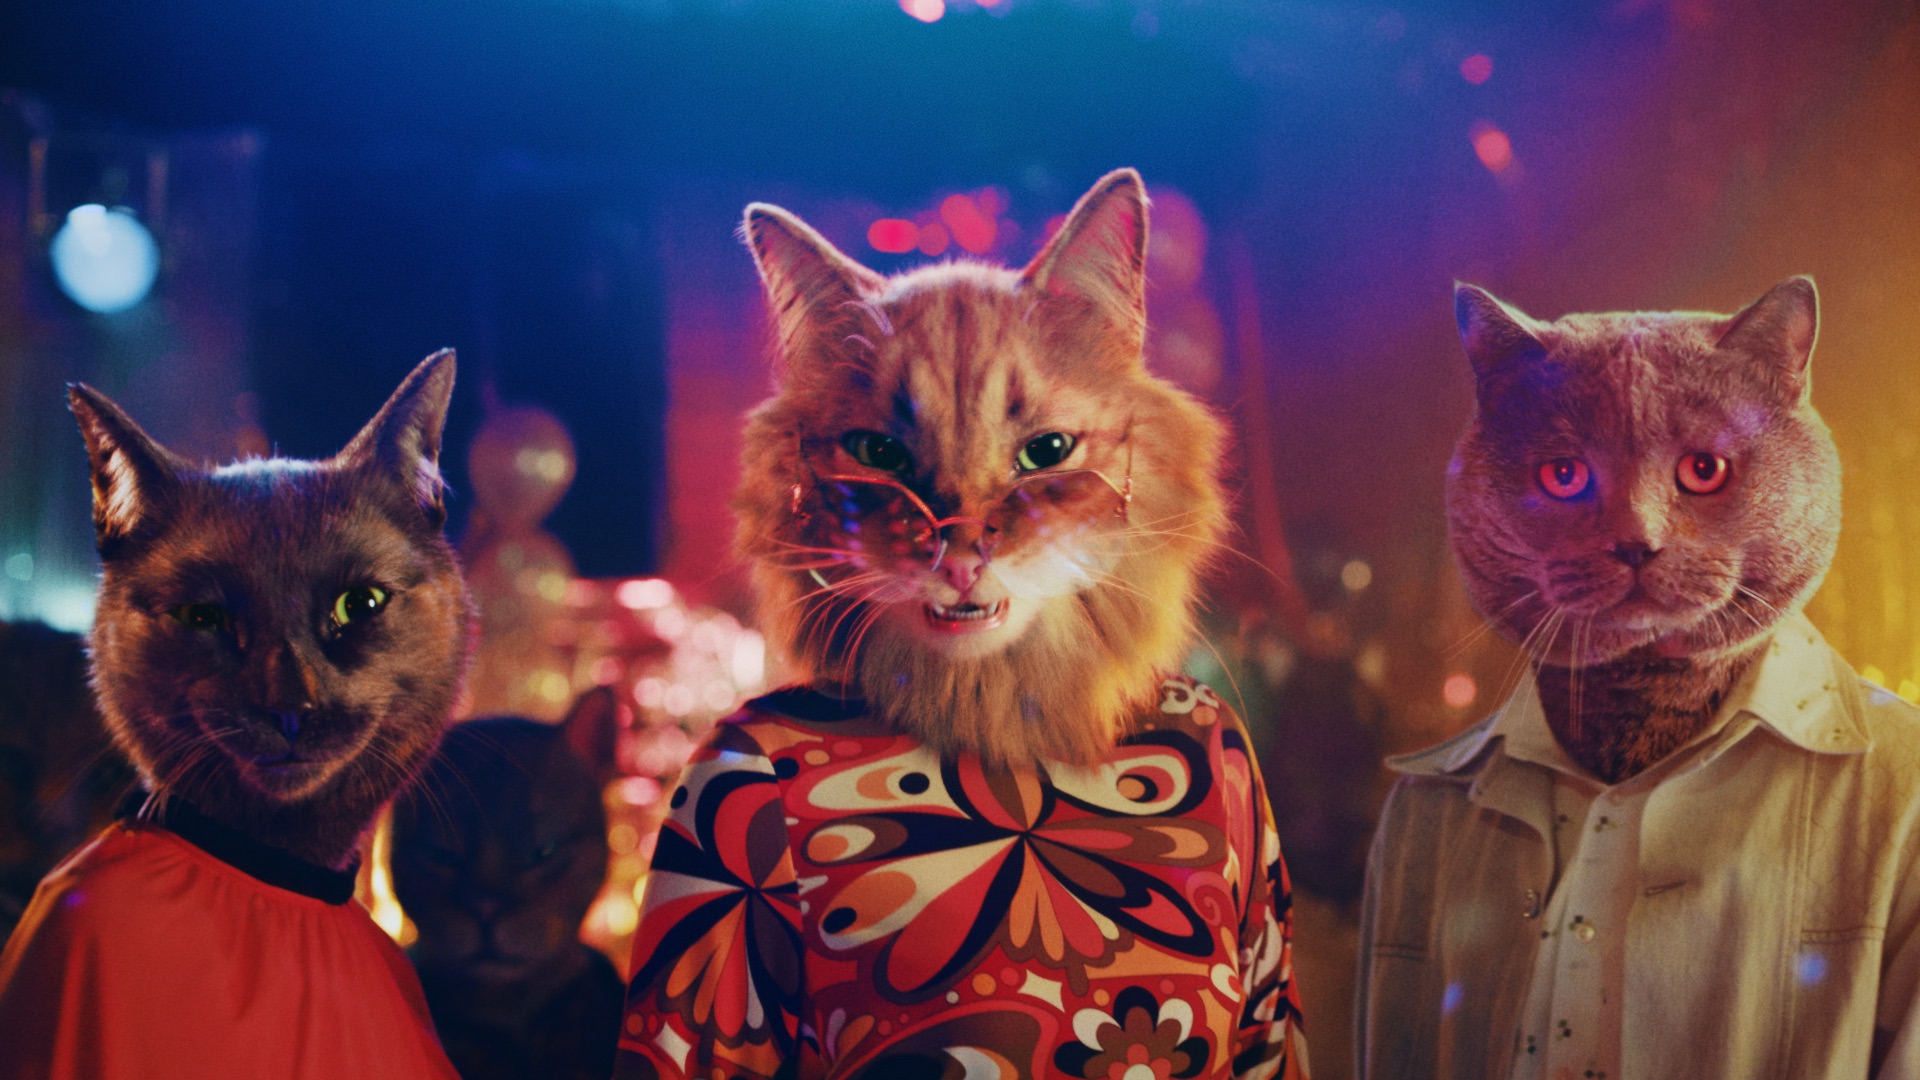 Go behind the Moving Image with MPC and Arm & Hammer's Funky Felines